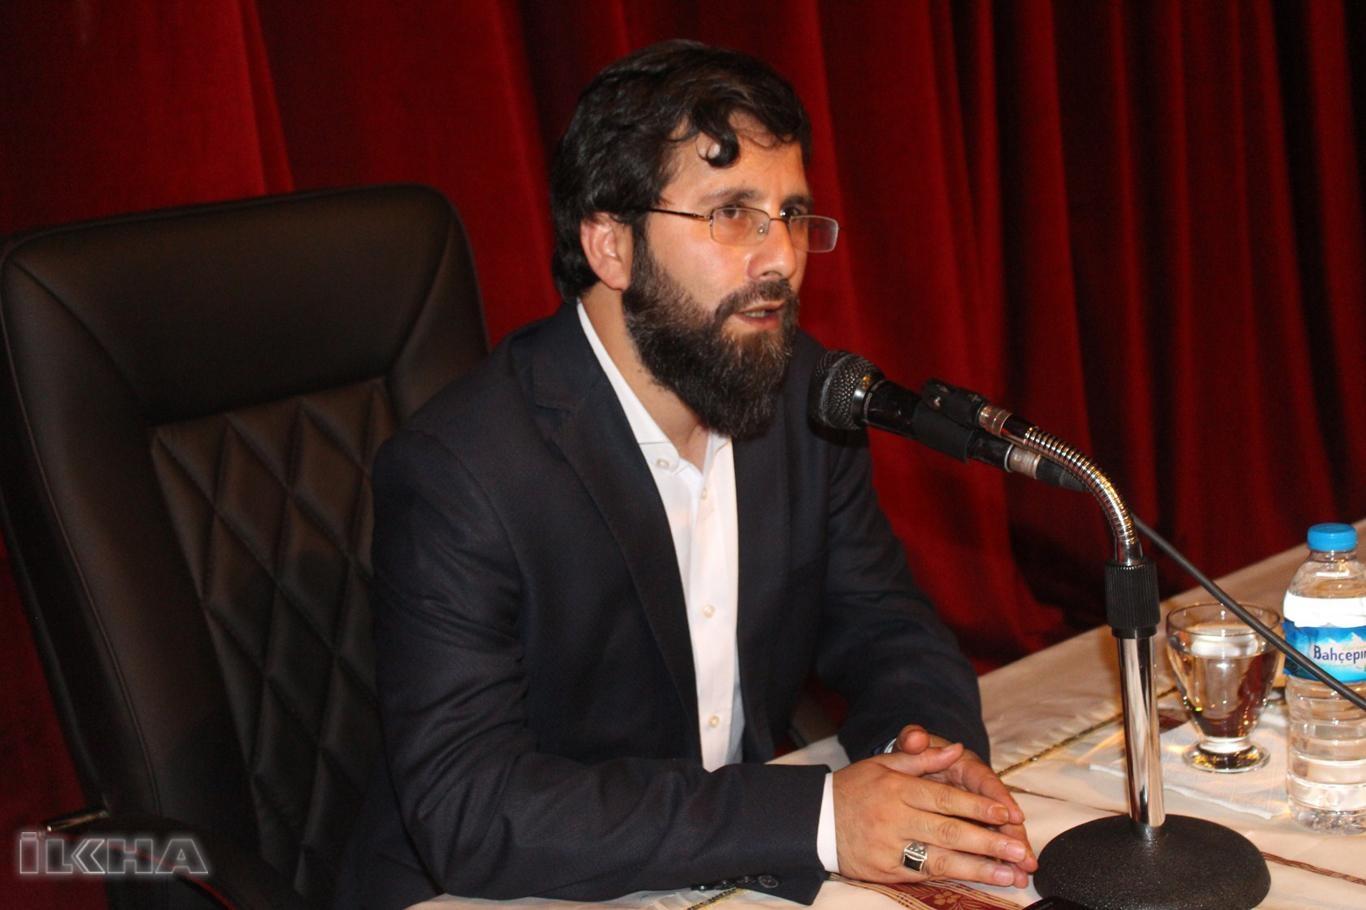 There are still February 28 victims in prisons: Yakup Köse